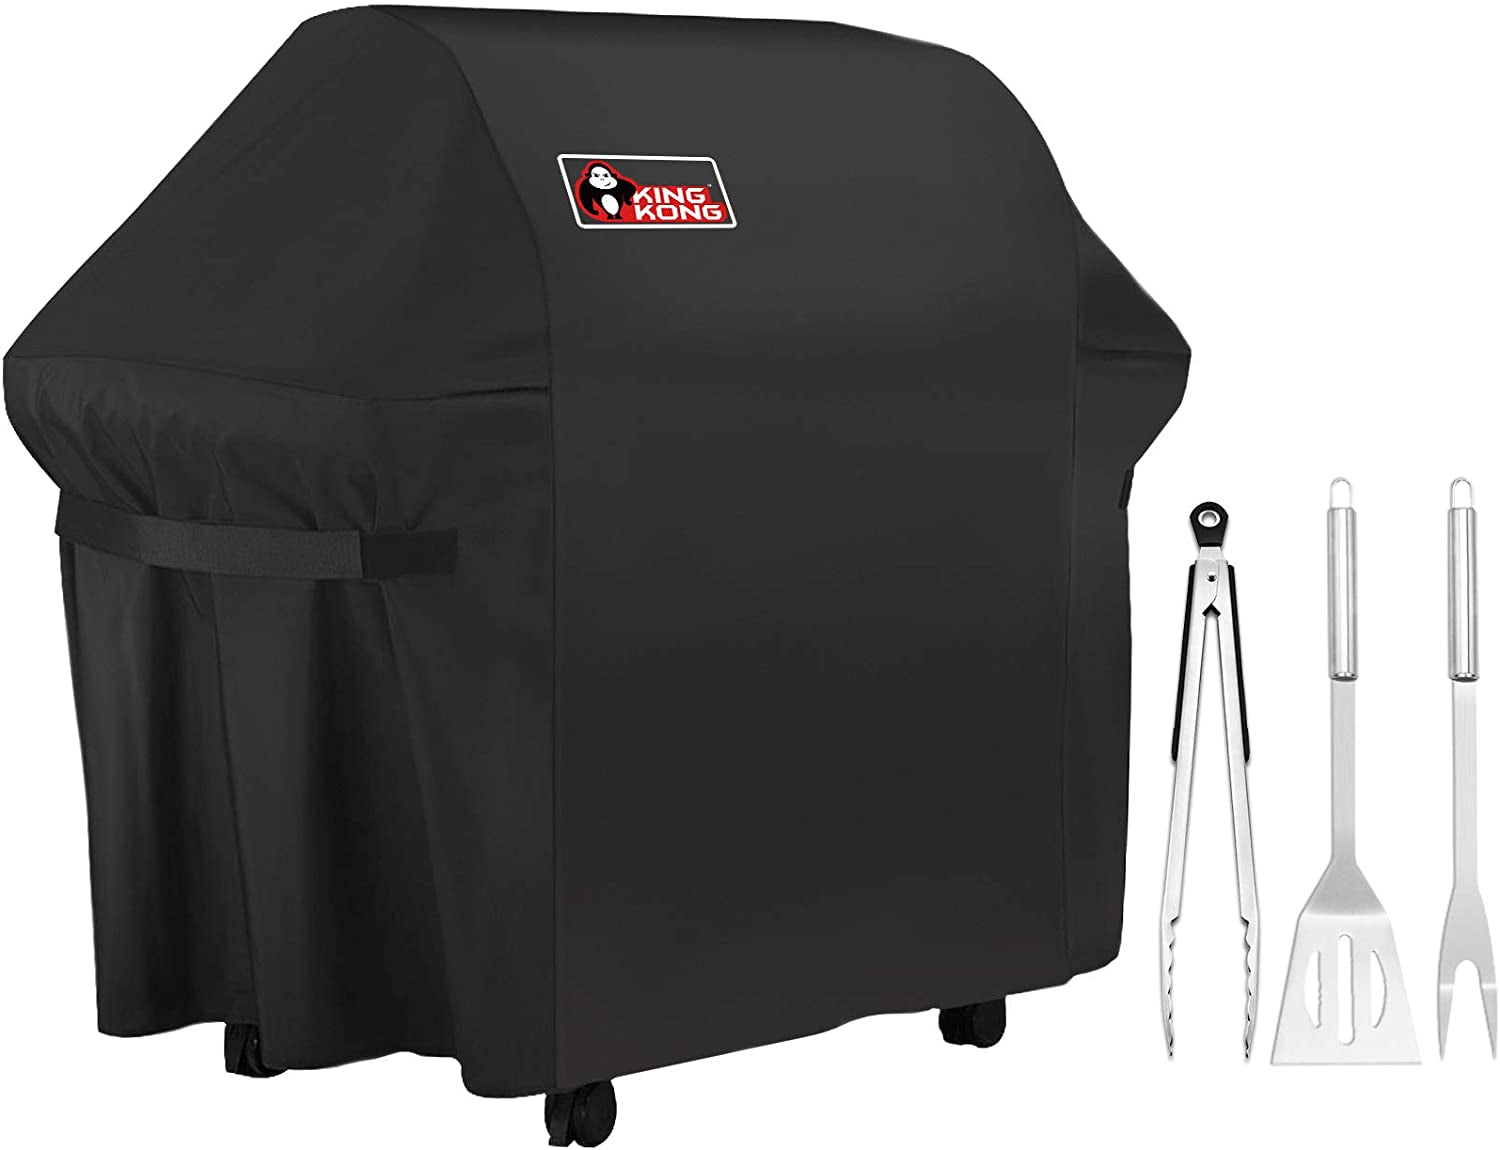 Kingkong, Kingkong 7107 Waterproof BBQ Cover for Weber Genesis E and S Series Gas Grill Including Stainless Steel Meat Fork, Spatula and Tongs, Genesis E/S-60